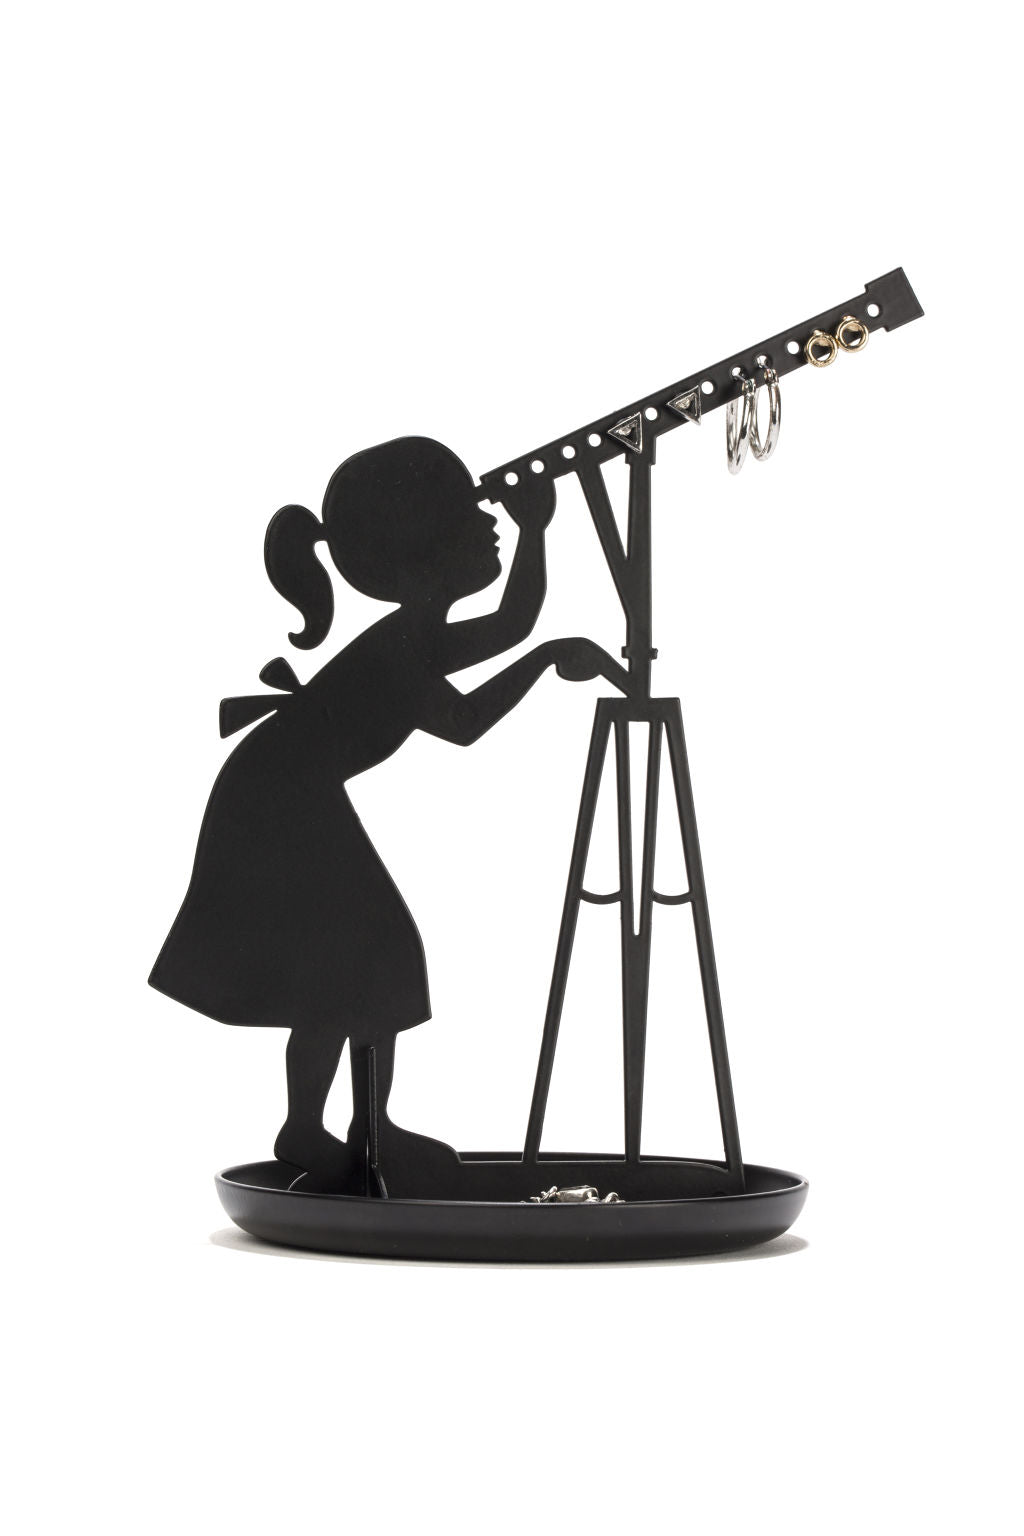 Jewellery stand with shadow of a girl in a dress with a ponytail looking through a telescope. This shadow art sits in a round tray. The telescope features 14 holes for earrings. 